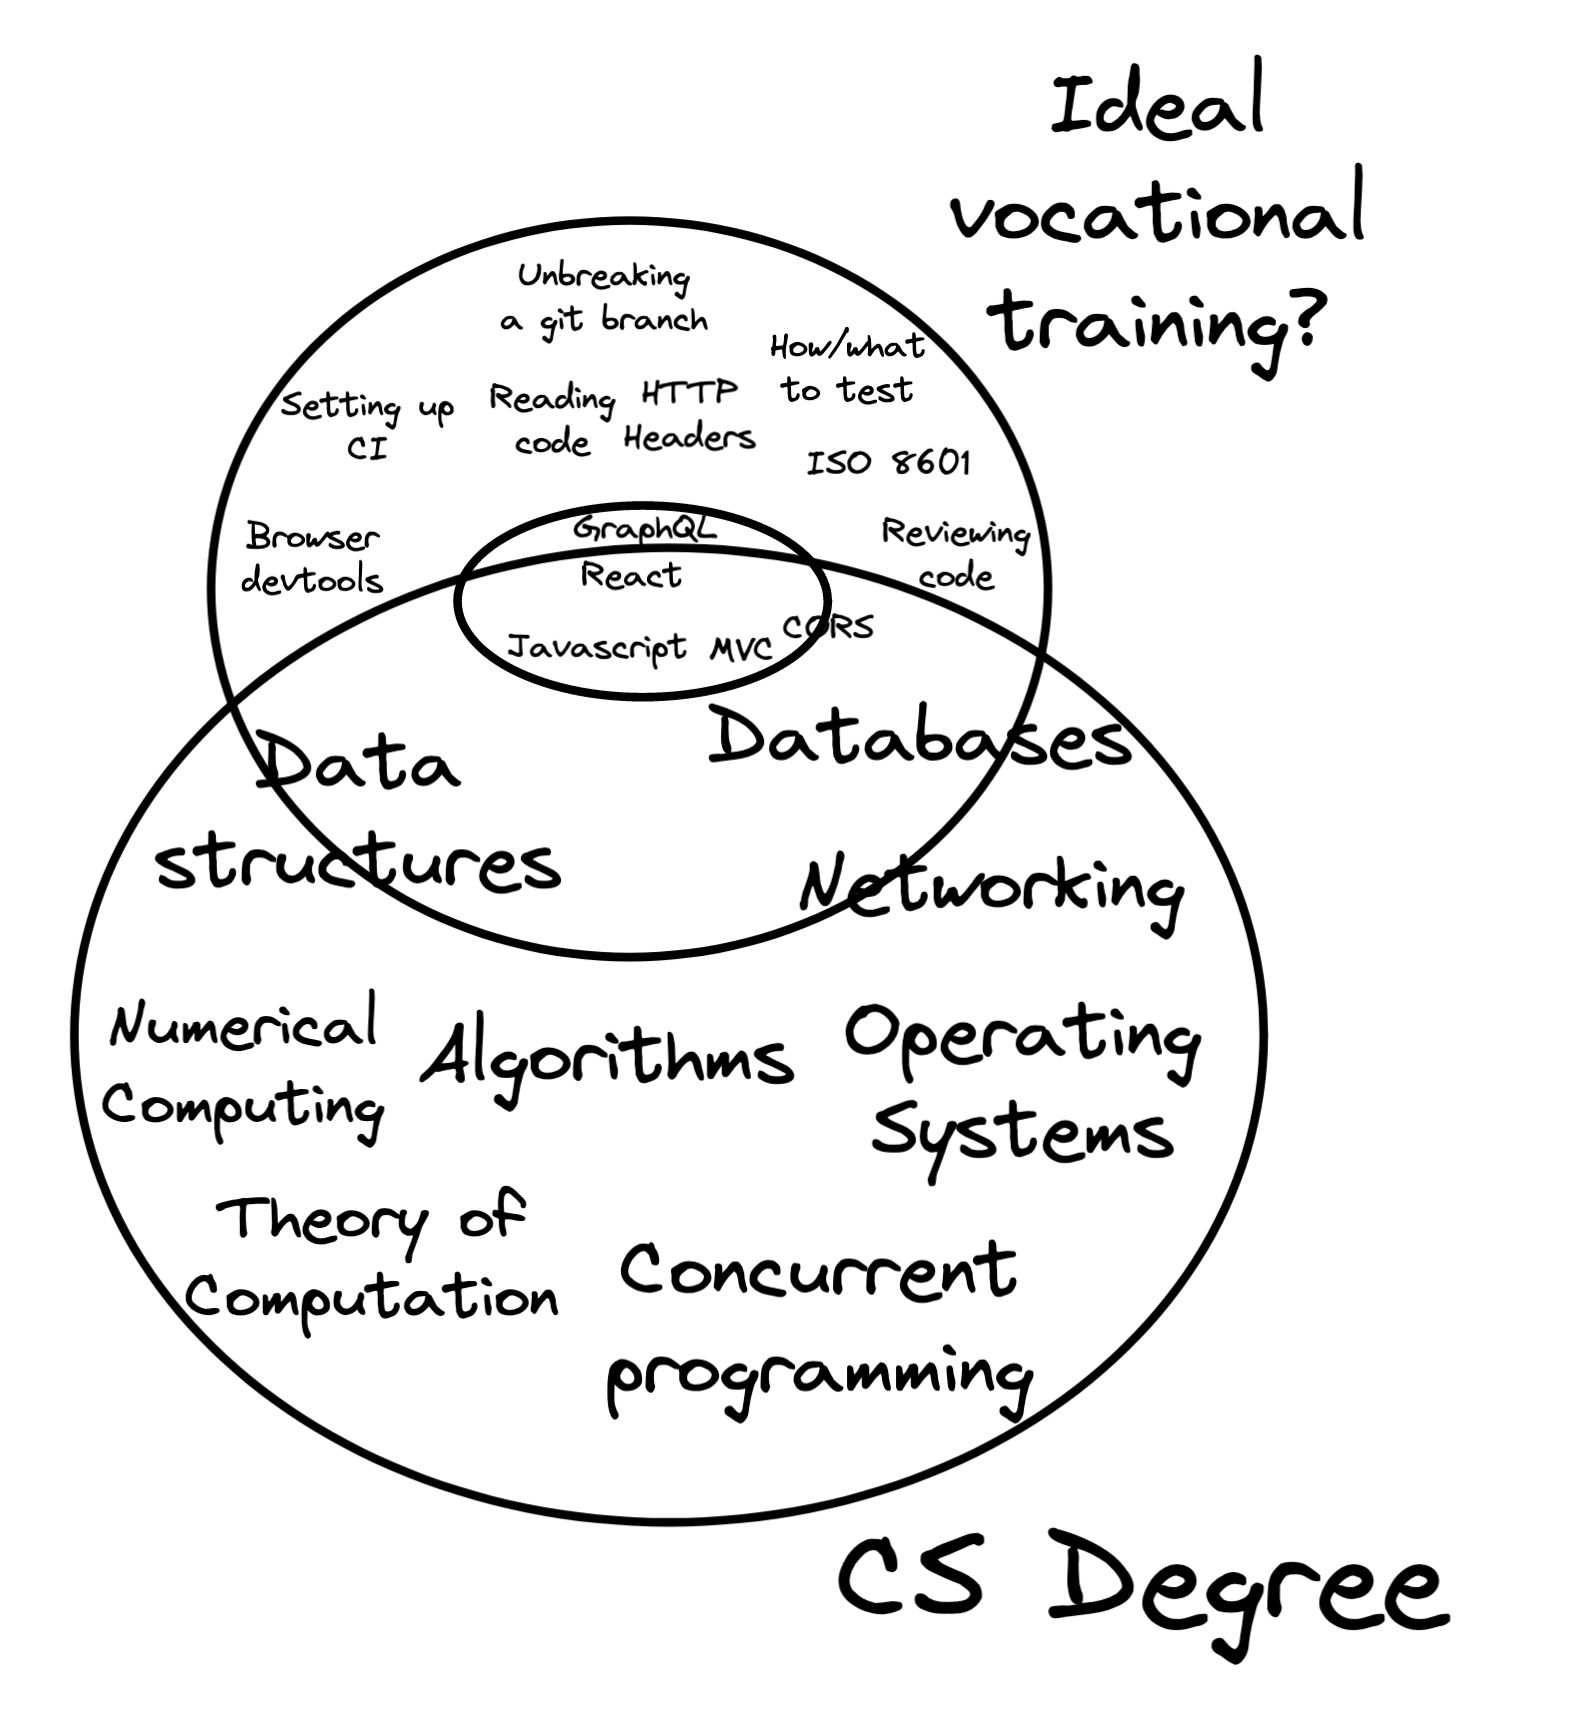 A new circle has been overlayed: it contains the bootcamp and overlaps with the college degree. It doesn't contain theoretical subjects like Theory of Computation, but it adds practical topics like ISO 8601 and HTTP headers.